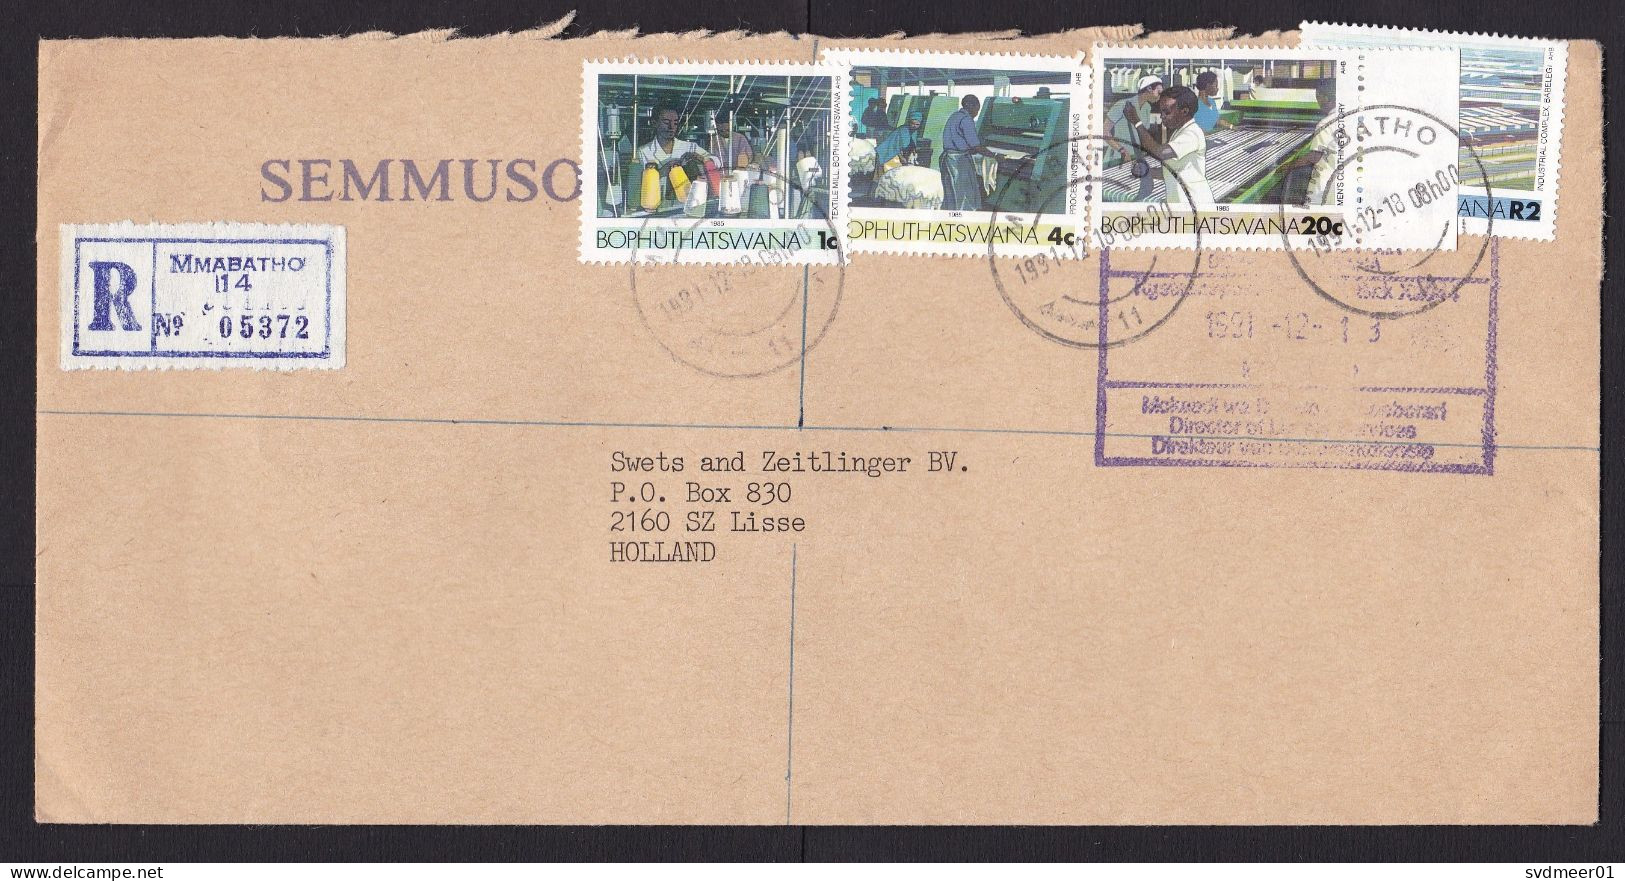 Bophuthatswana: Registered Cover To Netherlands, 1991, 4 Stamps, Textile Industry, Rare R-label (roughly Opened) - Bophuthatswana